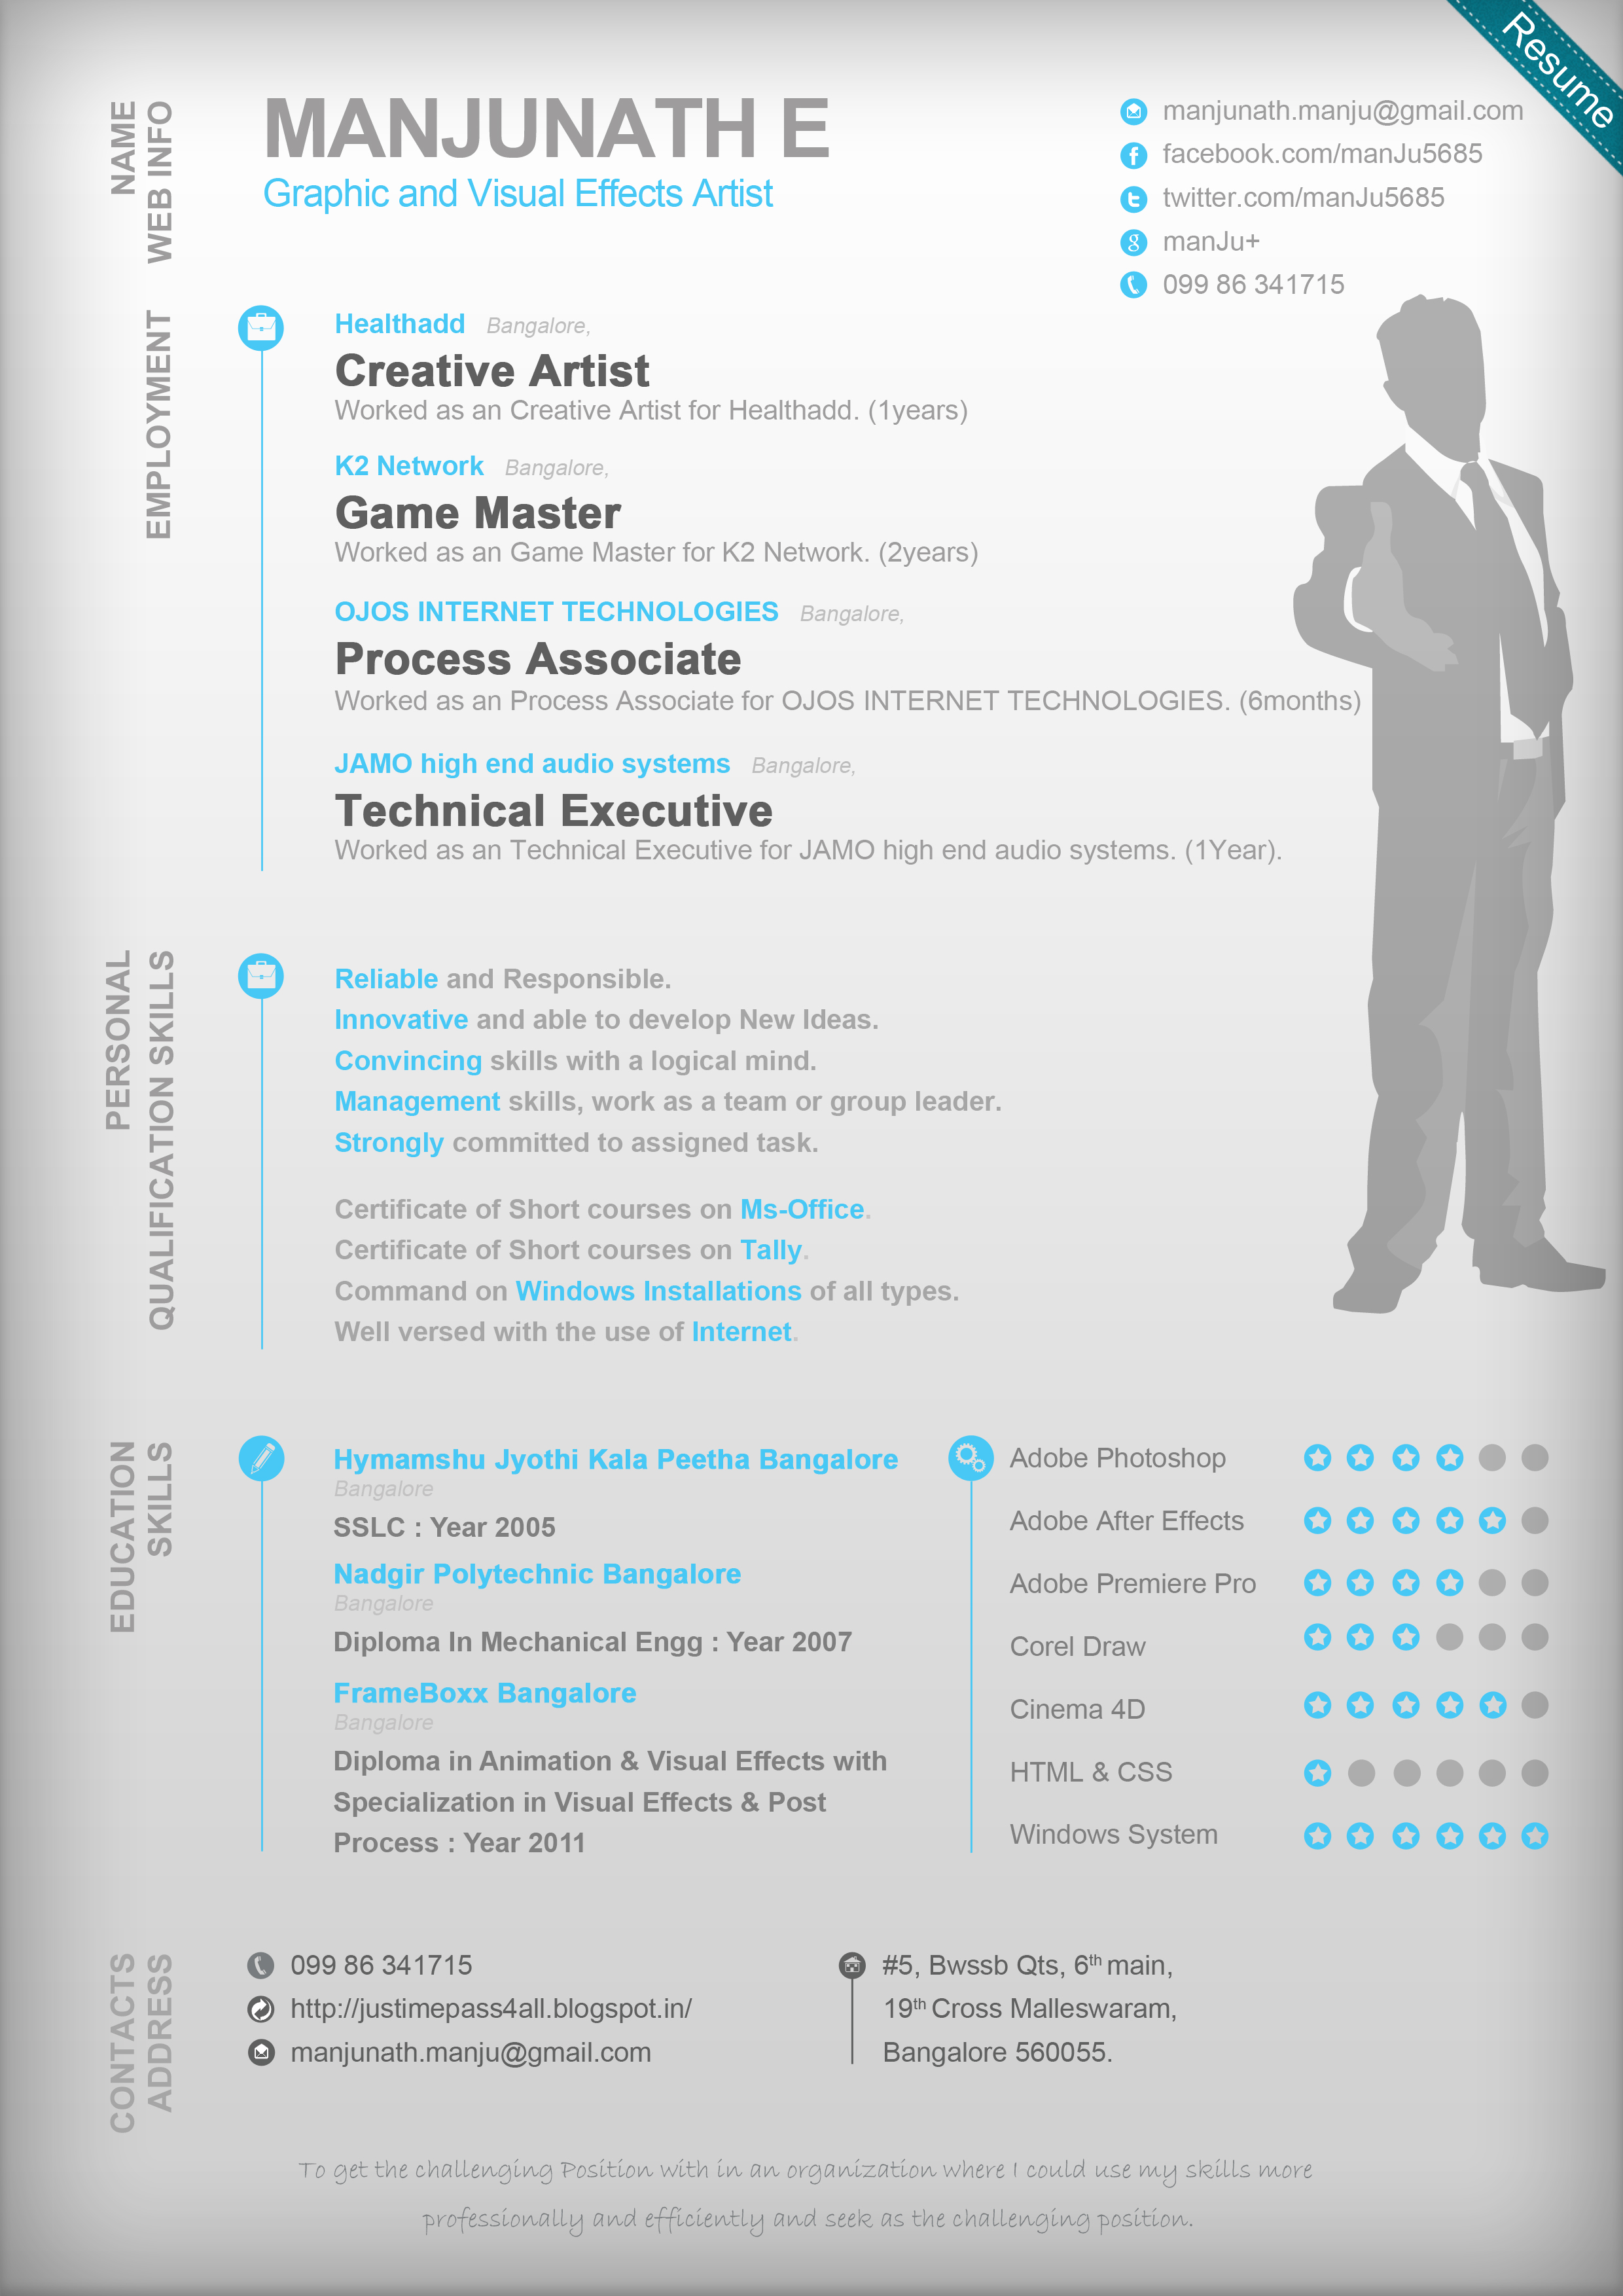 My Resume, Graphic and Visual Effects Artist by s0rdfish on DeviantArt